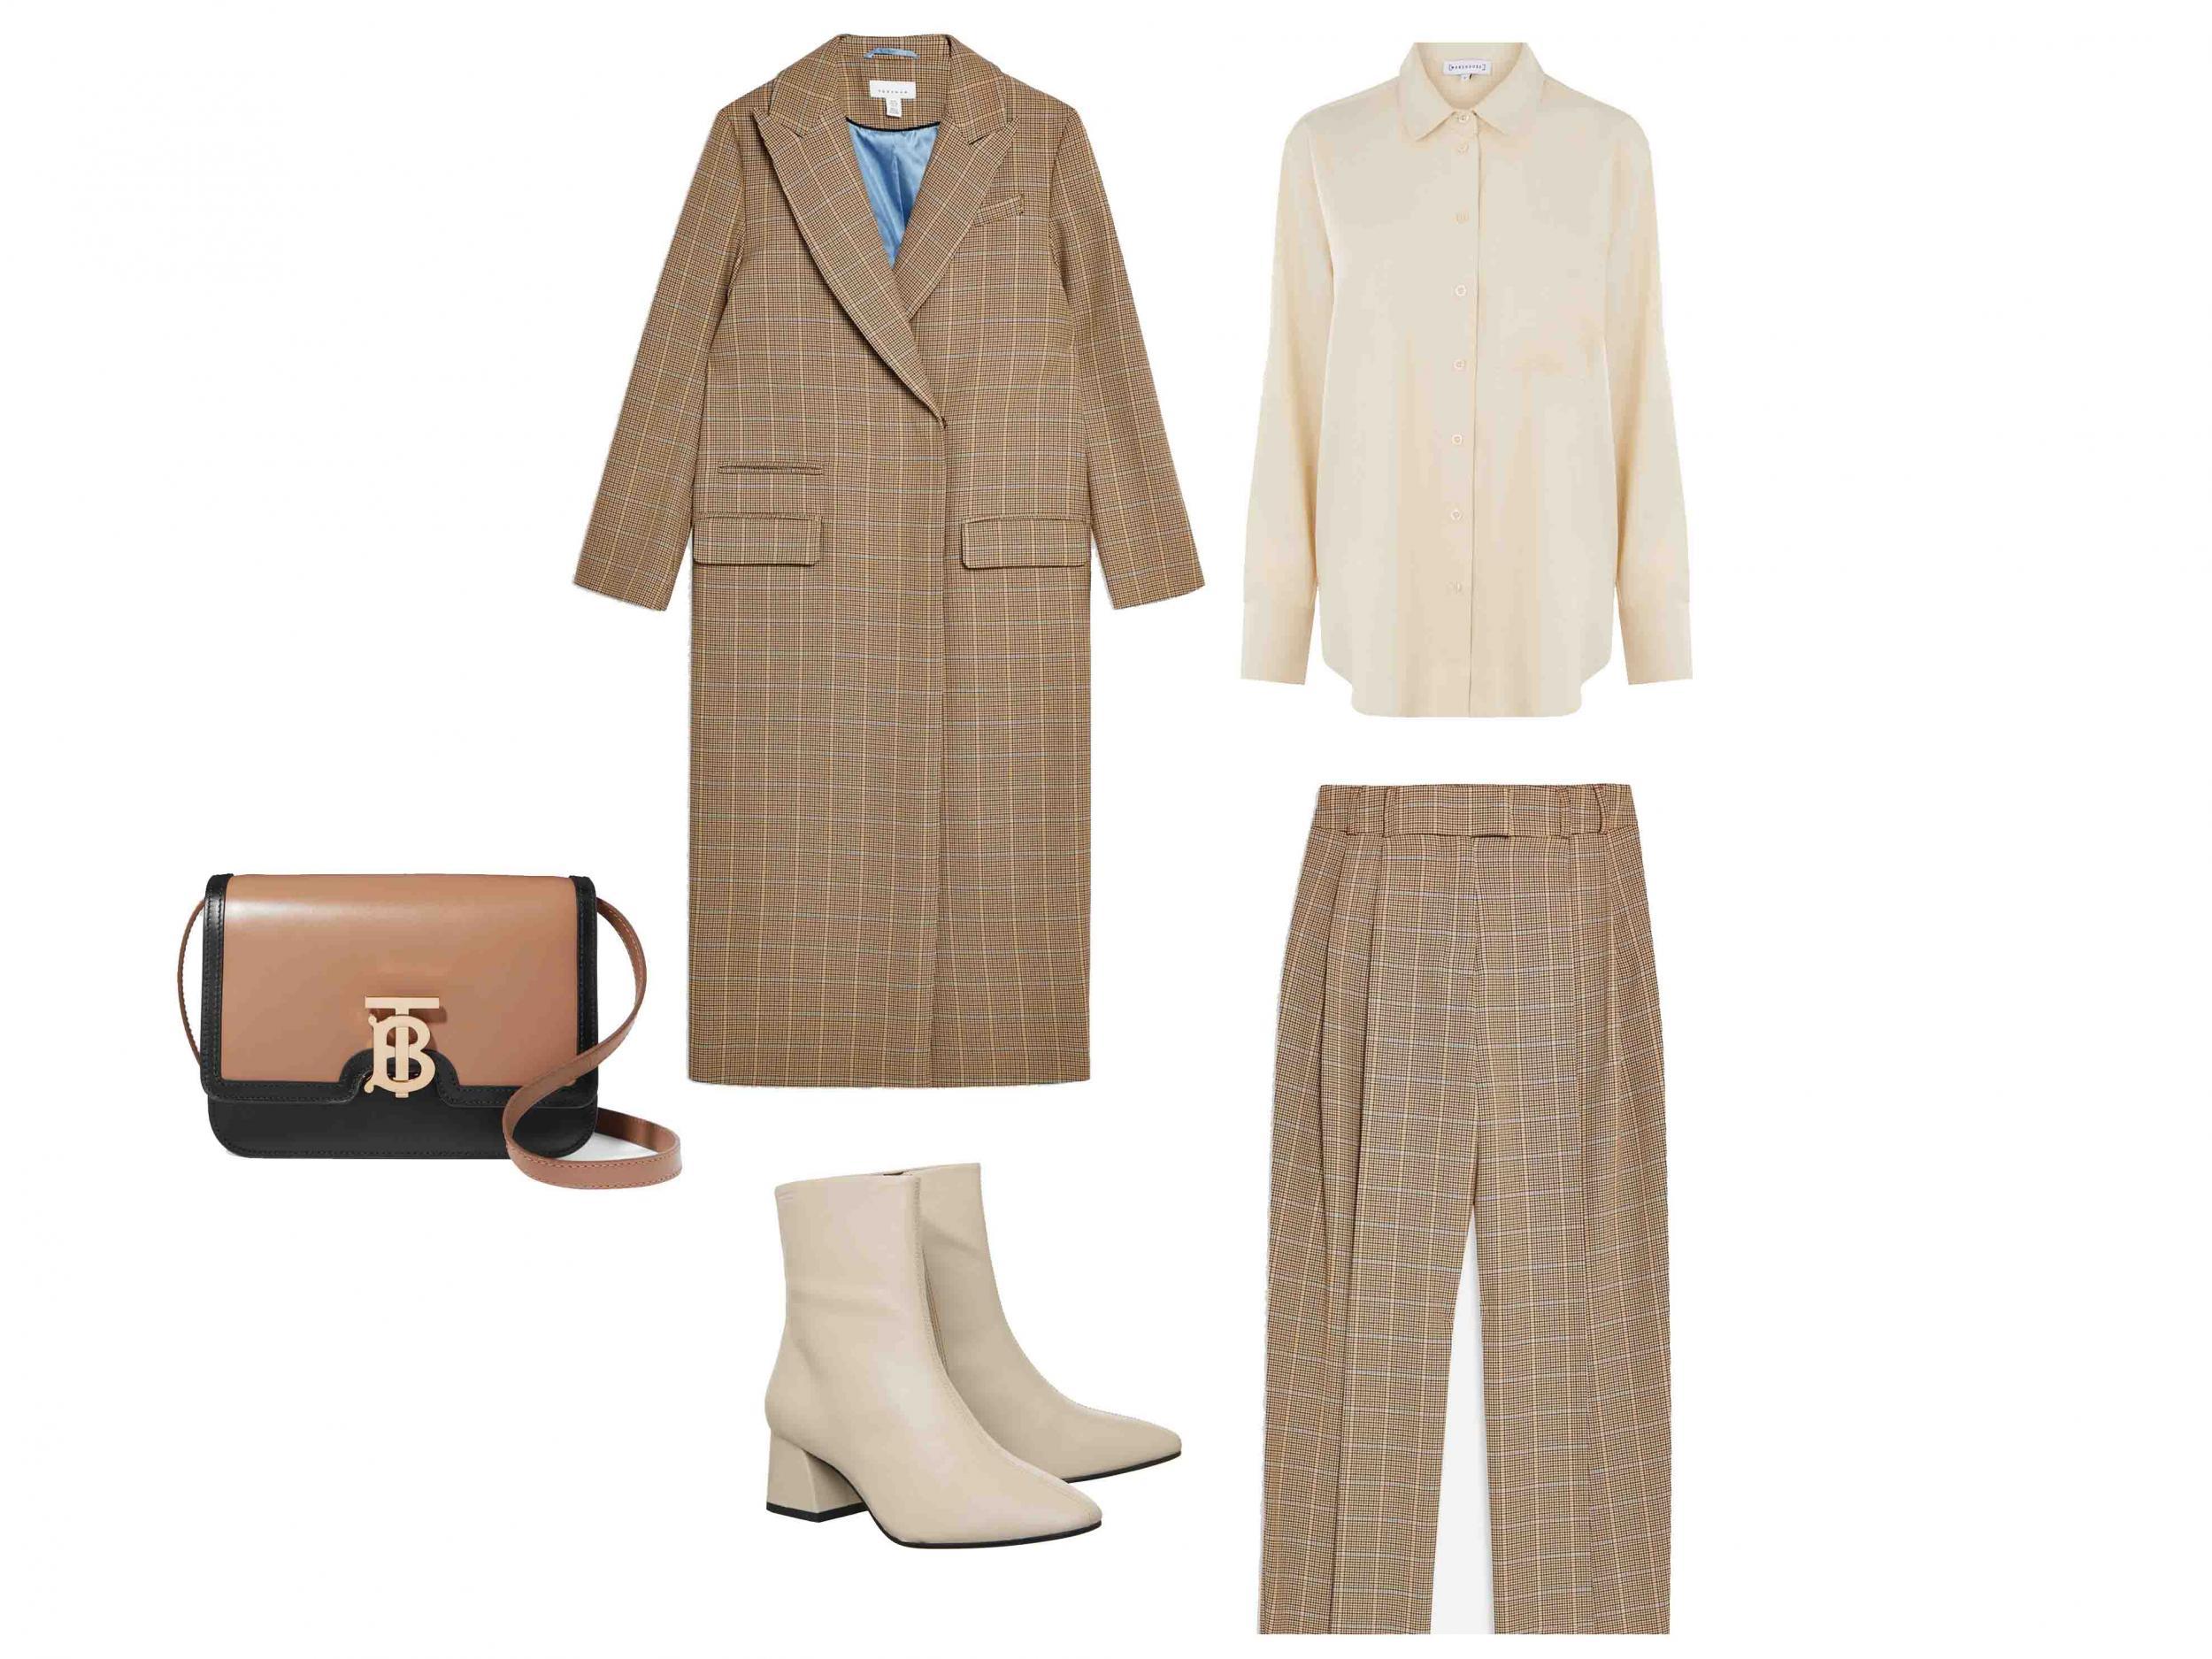 Burberry, TB Two-Tone Leather Shoulder Bag, ?1,590, Net-a-Porter;?Tailored Check Coat, ?85, Topshop;?Oversized Utility Shirt, ?32, Warehouse;?Vagabond, Alice Block Heel Boots, ?99.99, Office;?Check Wide Leg Trousers, ?29, Topshop